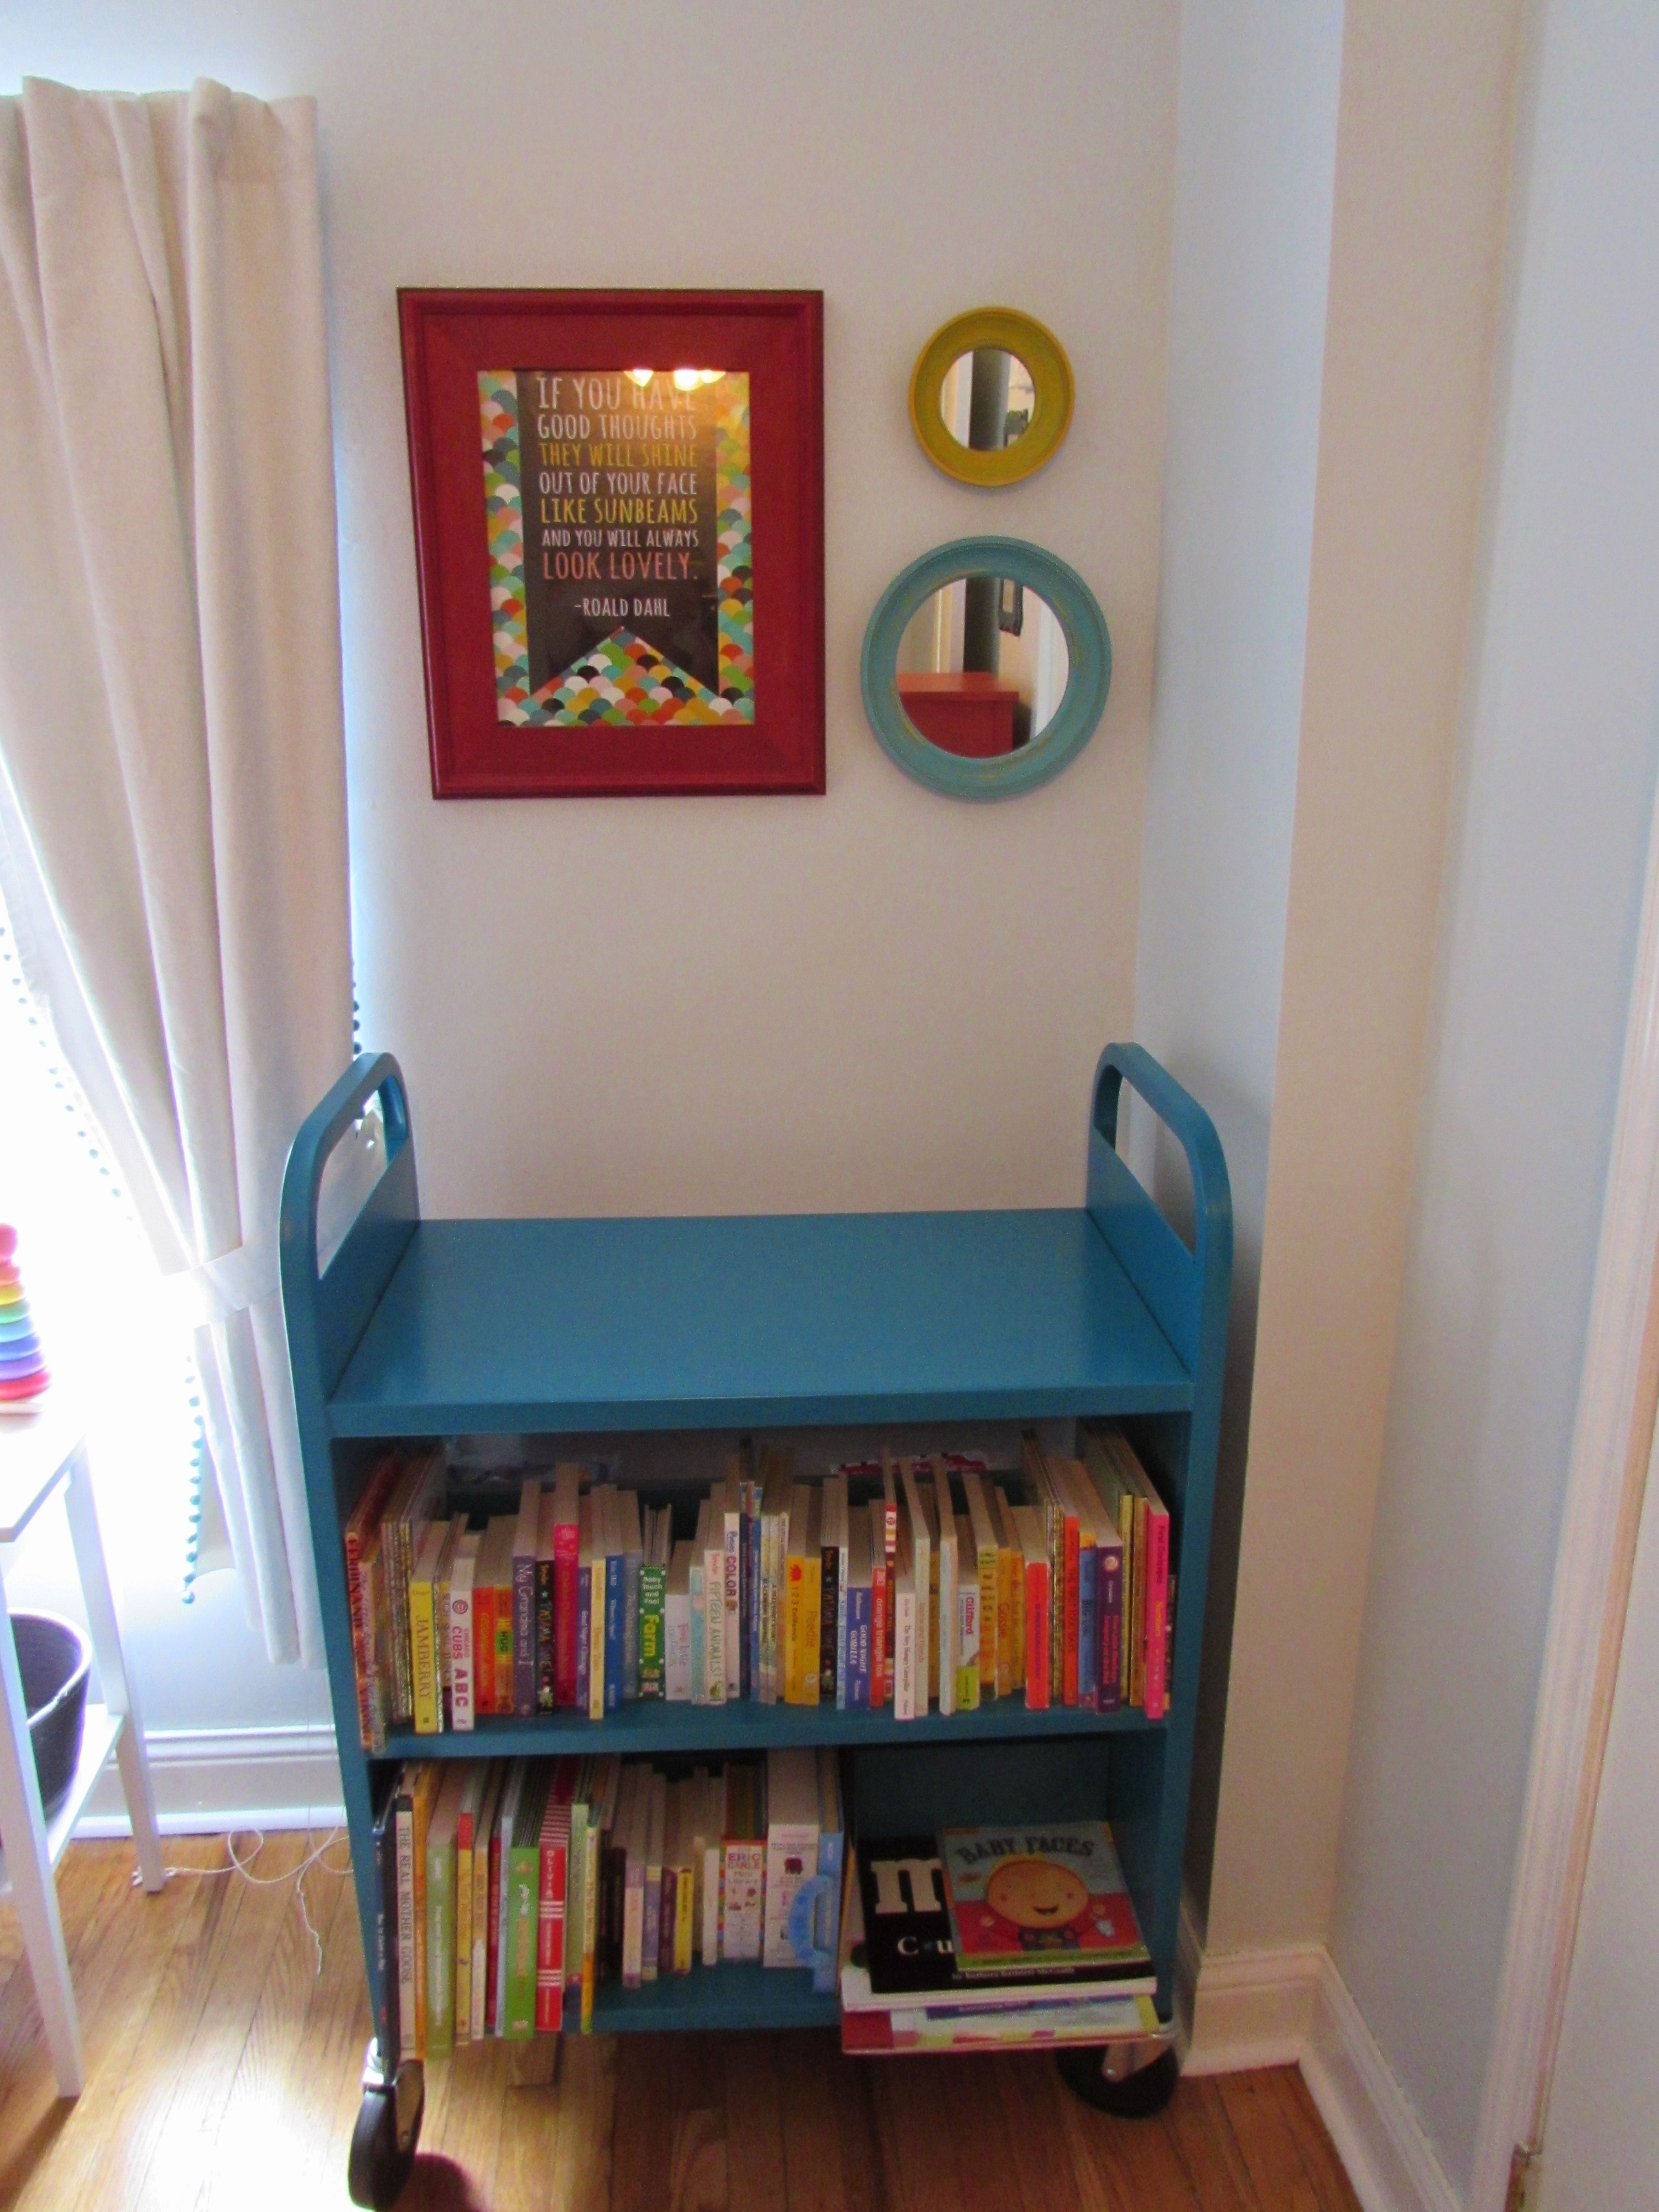 Spray Painted Library Cart for Holding Books in the Nursery